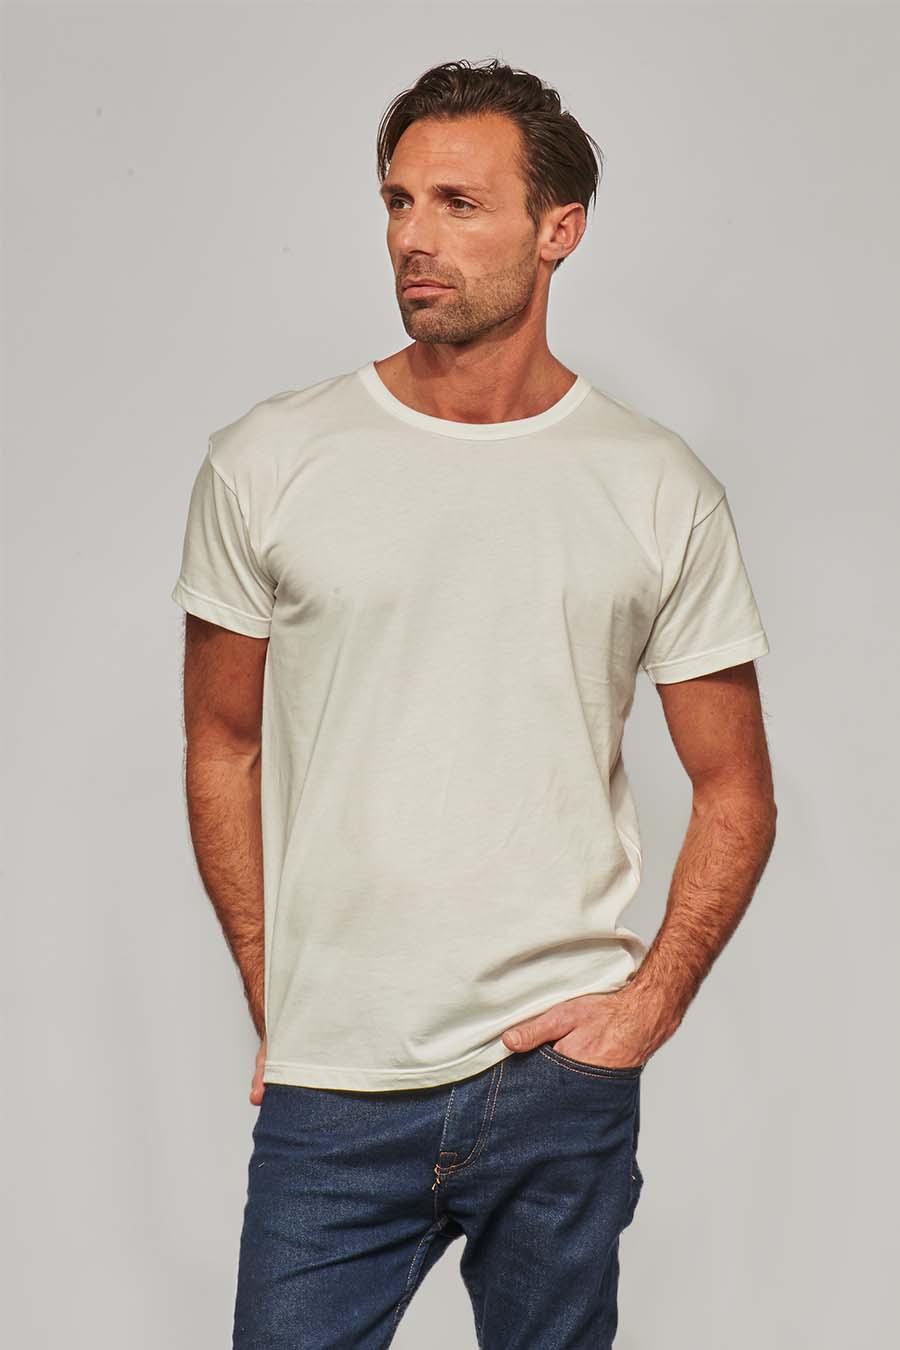 Tee-shirt homme classique made in France blanc - FIL ROUGE